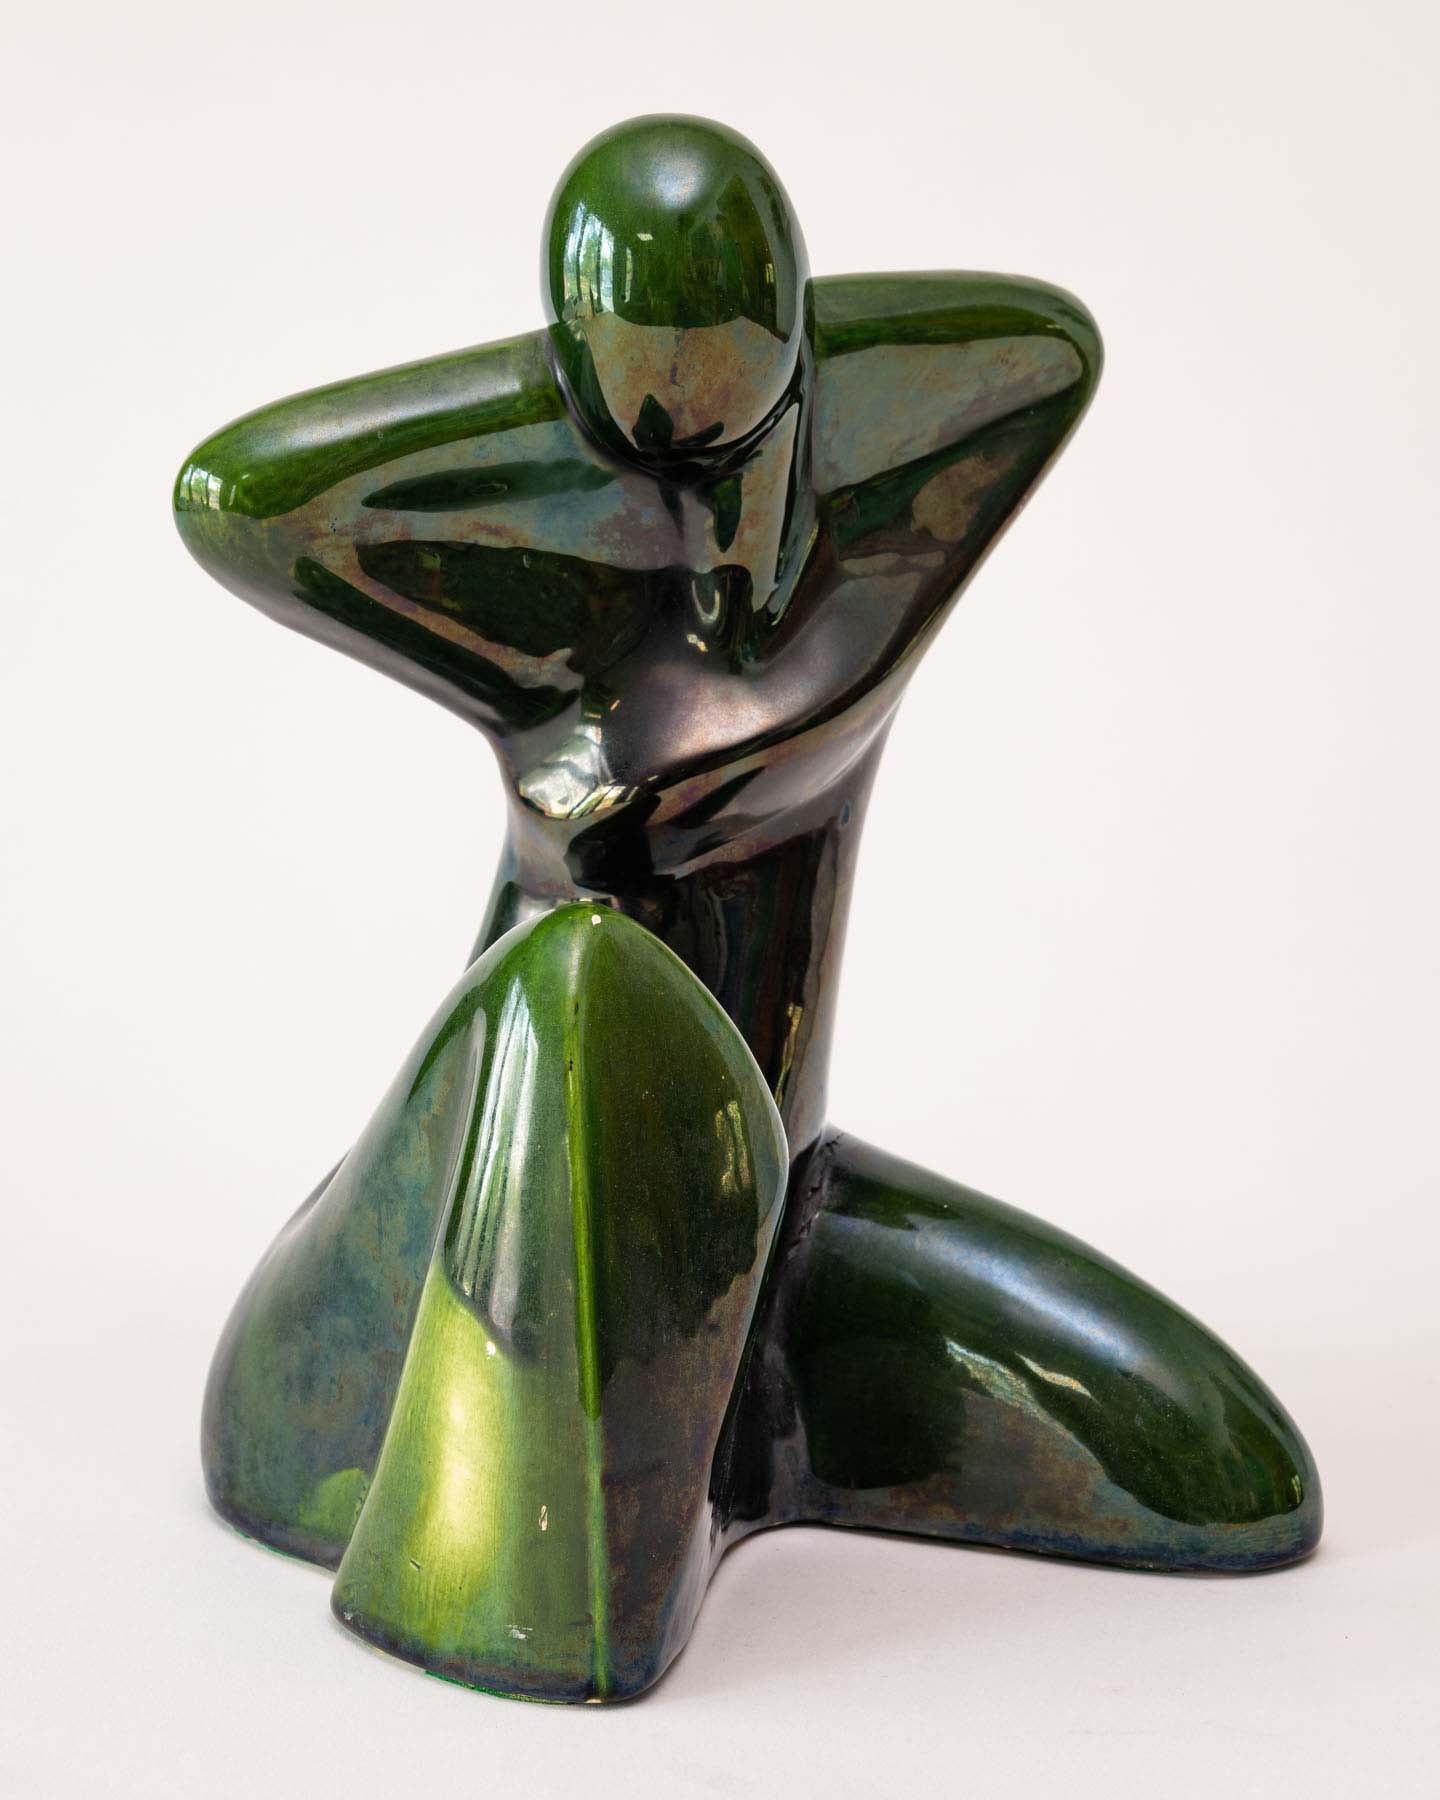 A smooth, ceramic abstract sculpture of a person sitting with one knee bent upwards and their arms behind their head.